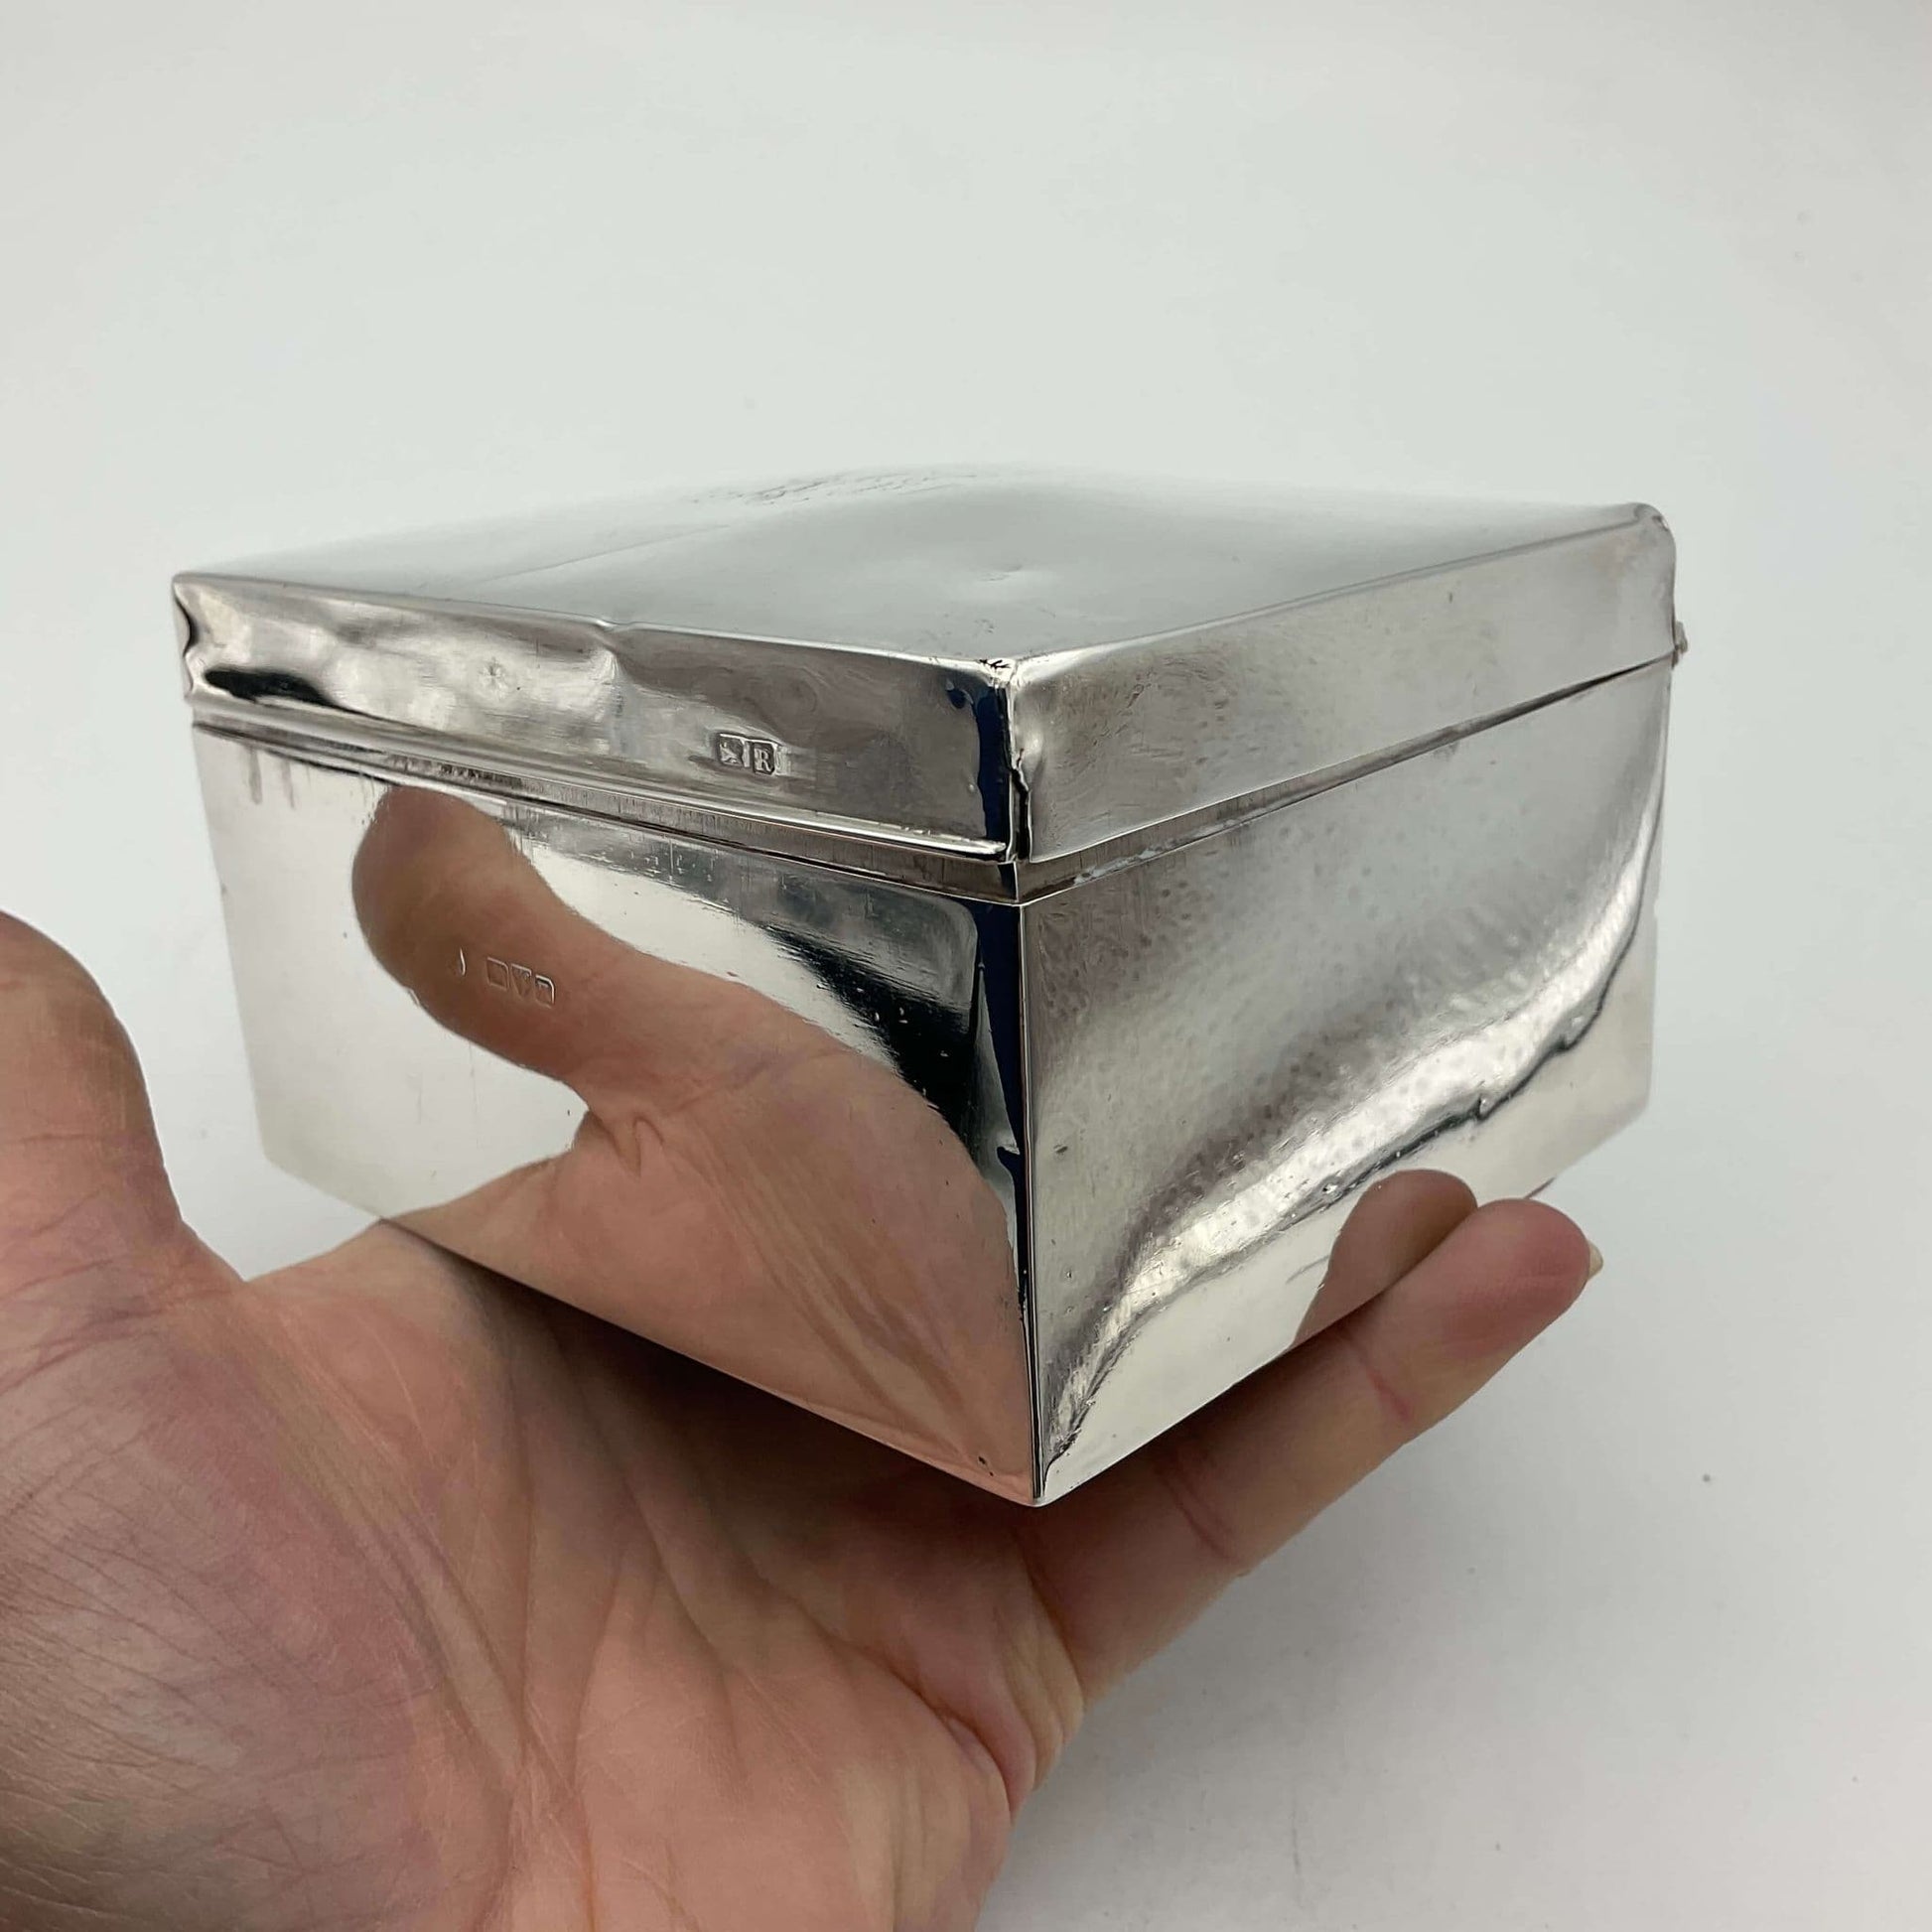 Antique Solid Silver Cigarette Box he’d in a hand showing how reflective the silver is